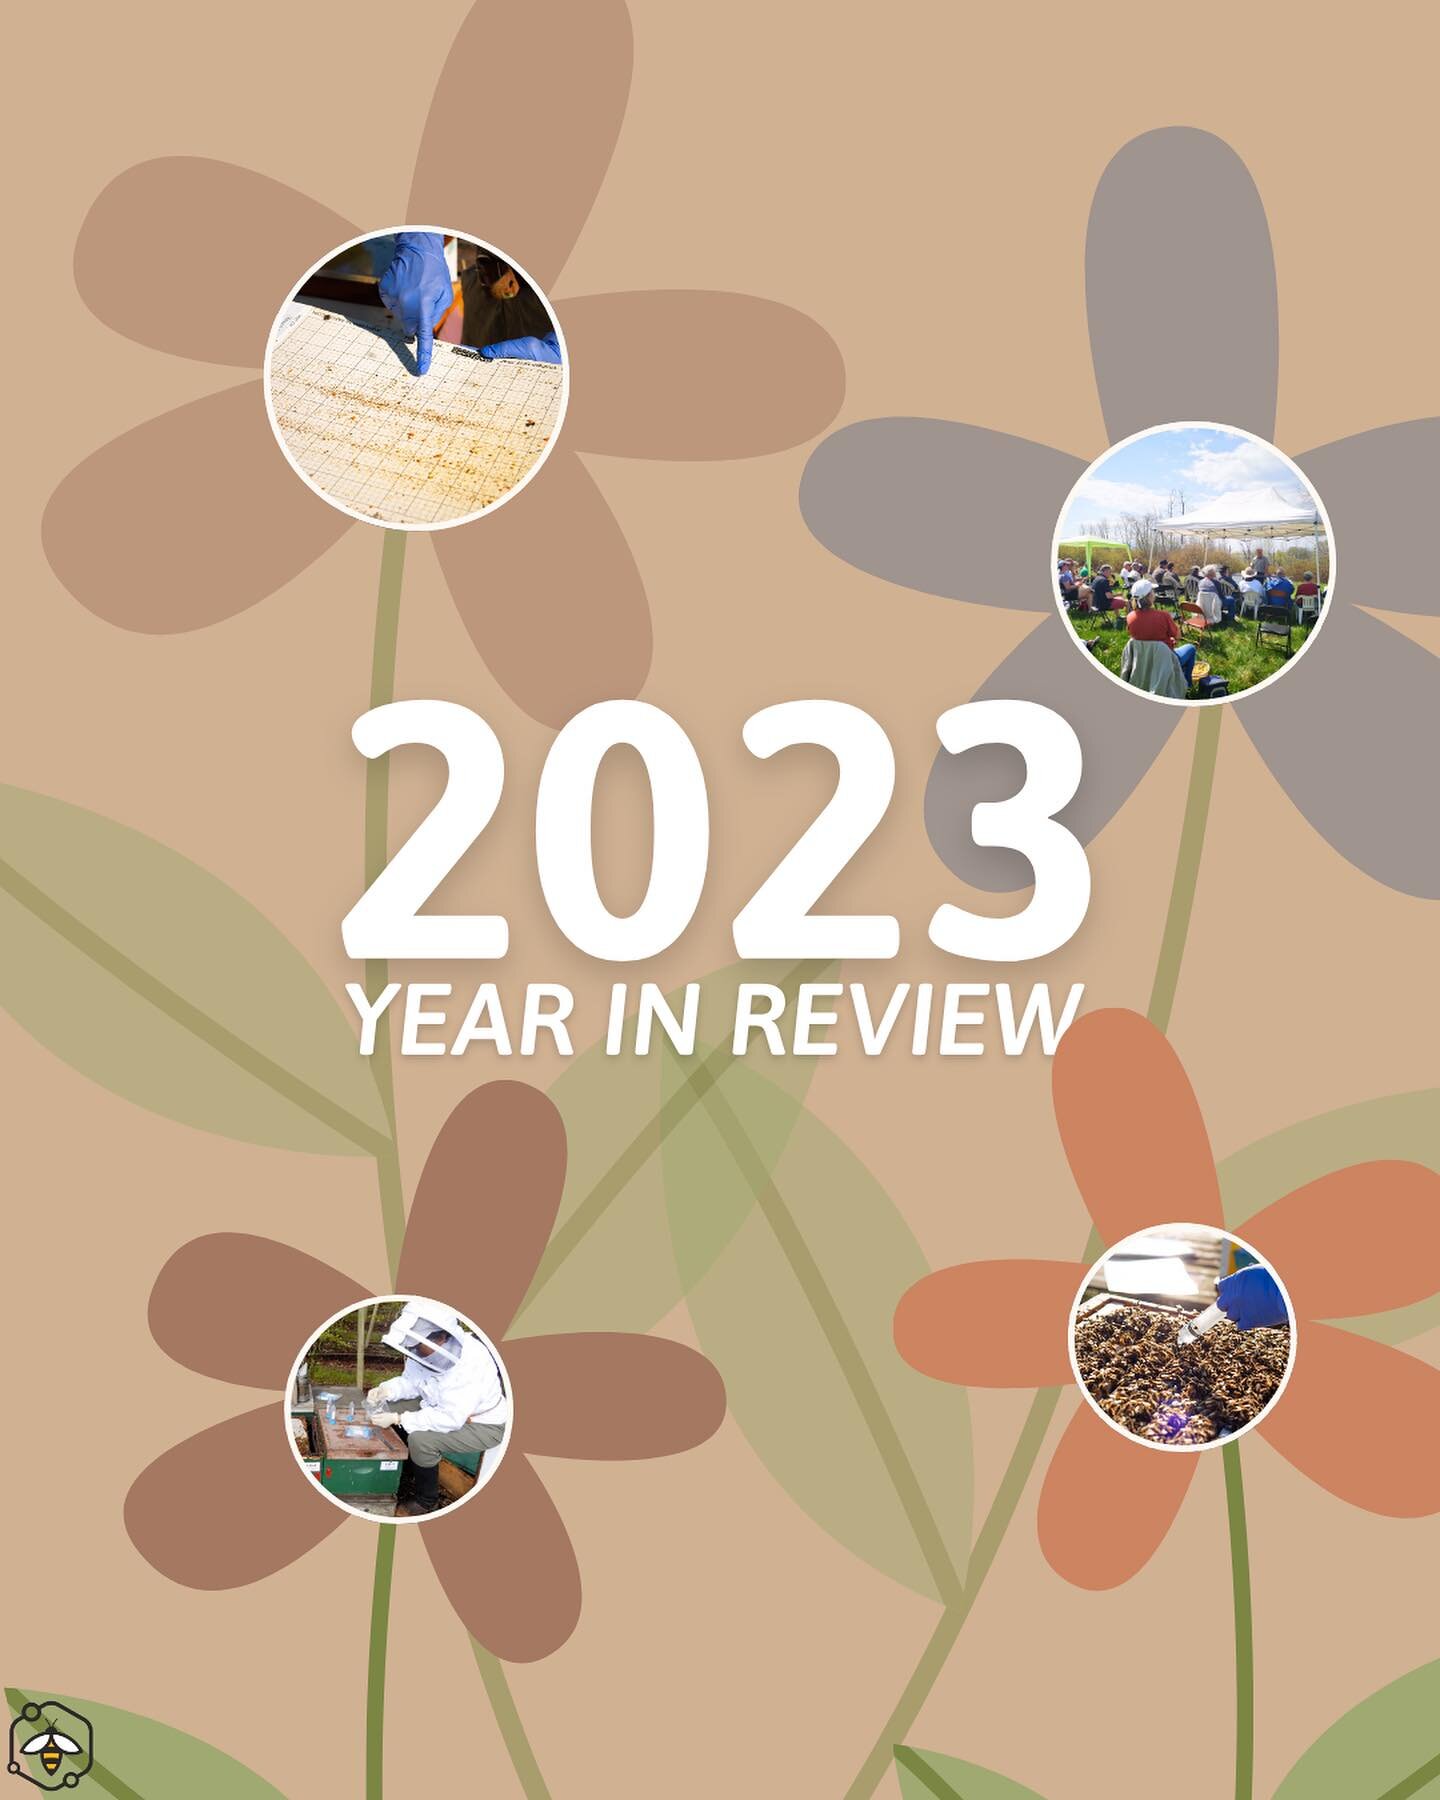 It&rsquo;s been a busy year for the BC-TTP! Here are some of the major accomplishments we met this year: 
&bull; Completed and published the sector analysis of BC&rsquo;s beekeeping industry.
&bull; Finished Varroa monitoring project.
&bull; Assisted